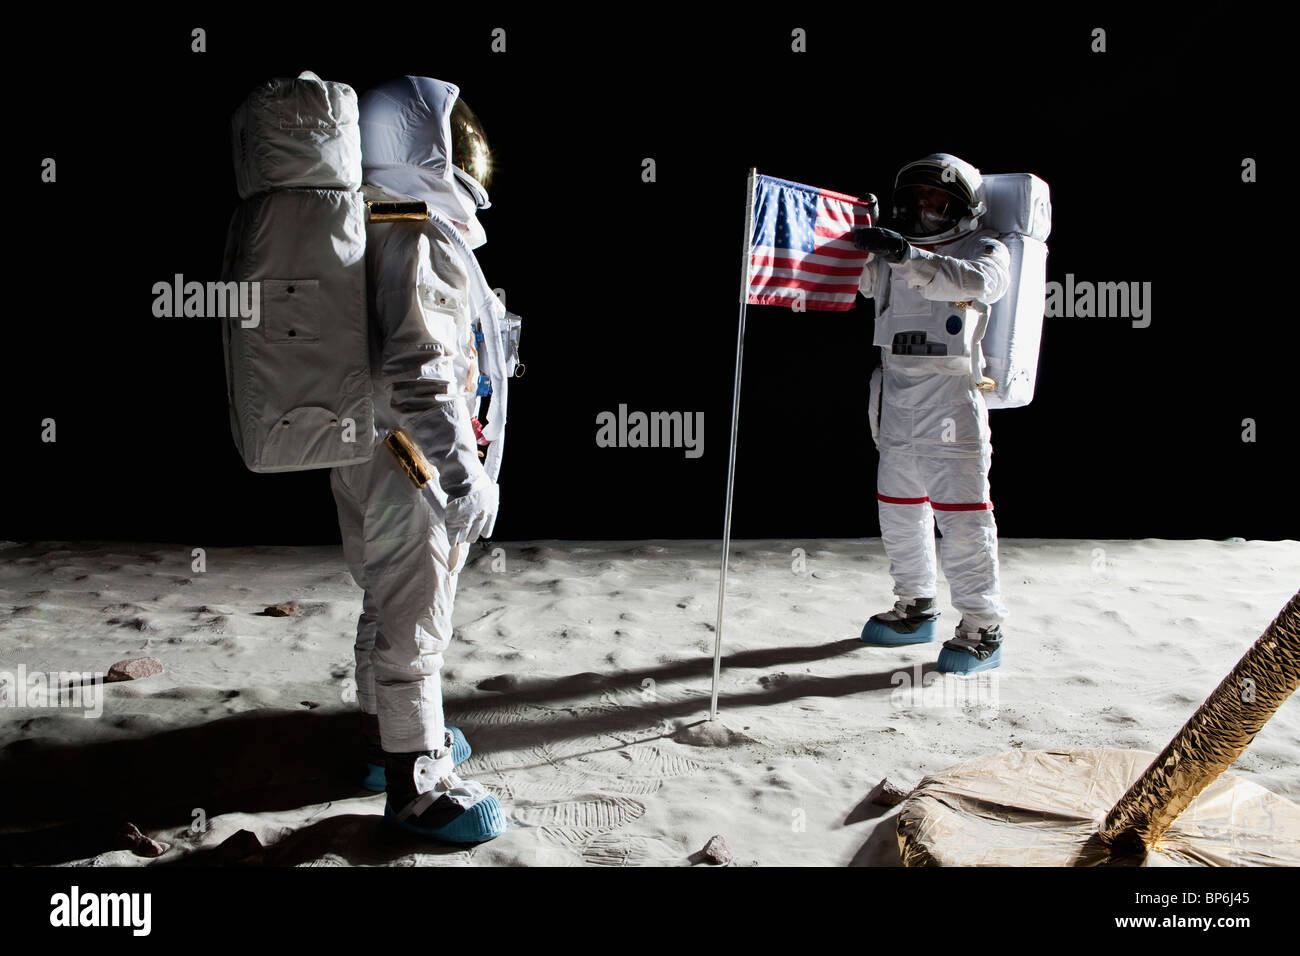 Two astronauts on the moon, an American flag in between them Stock Photo